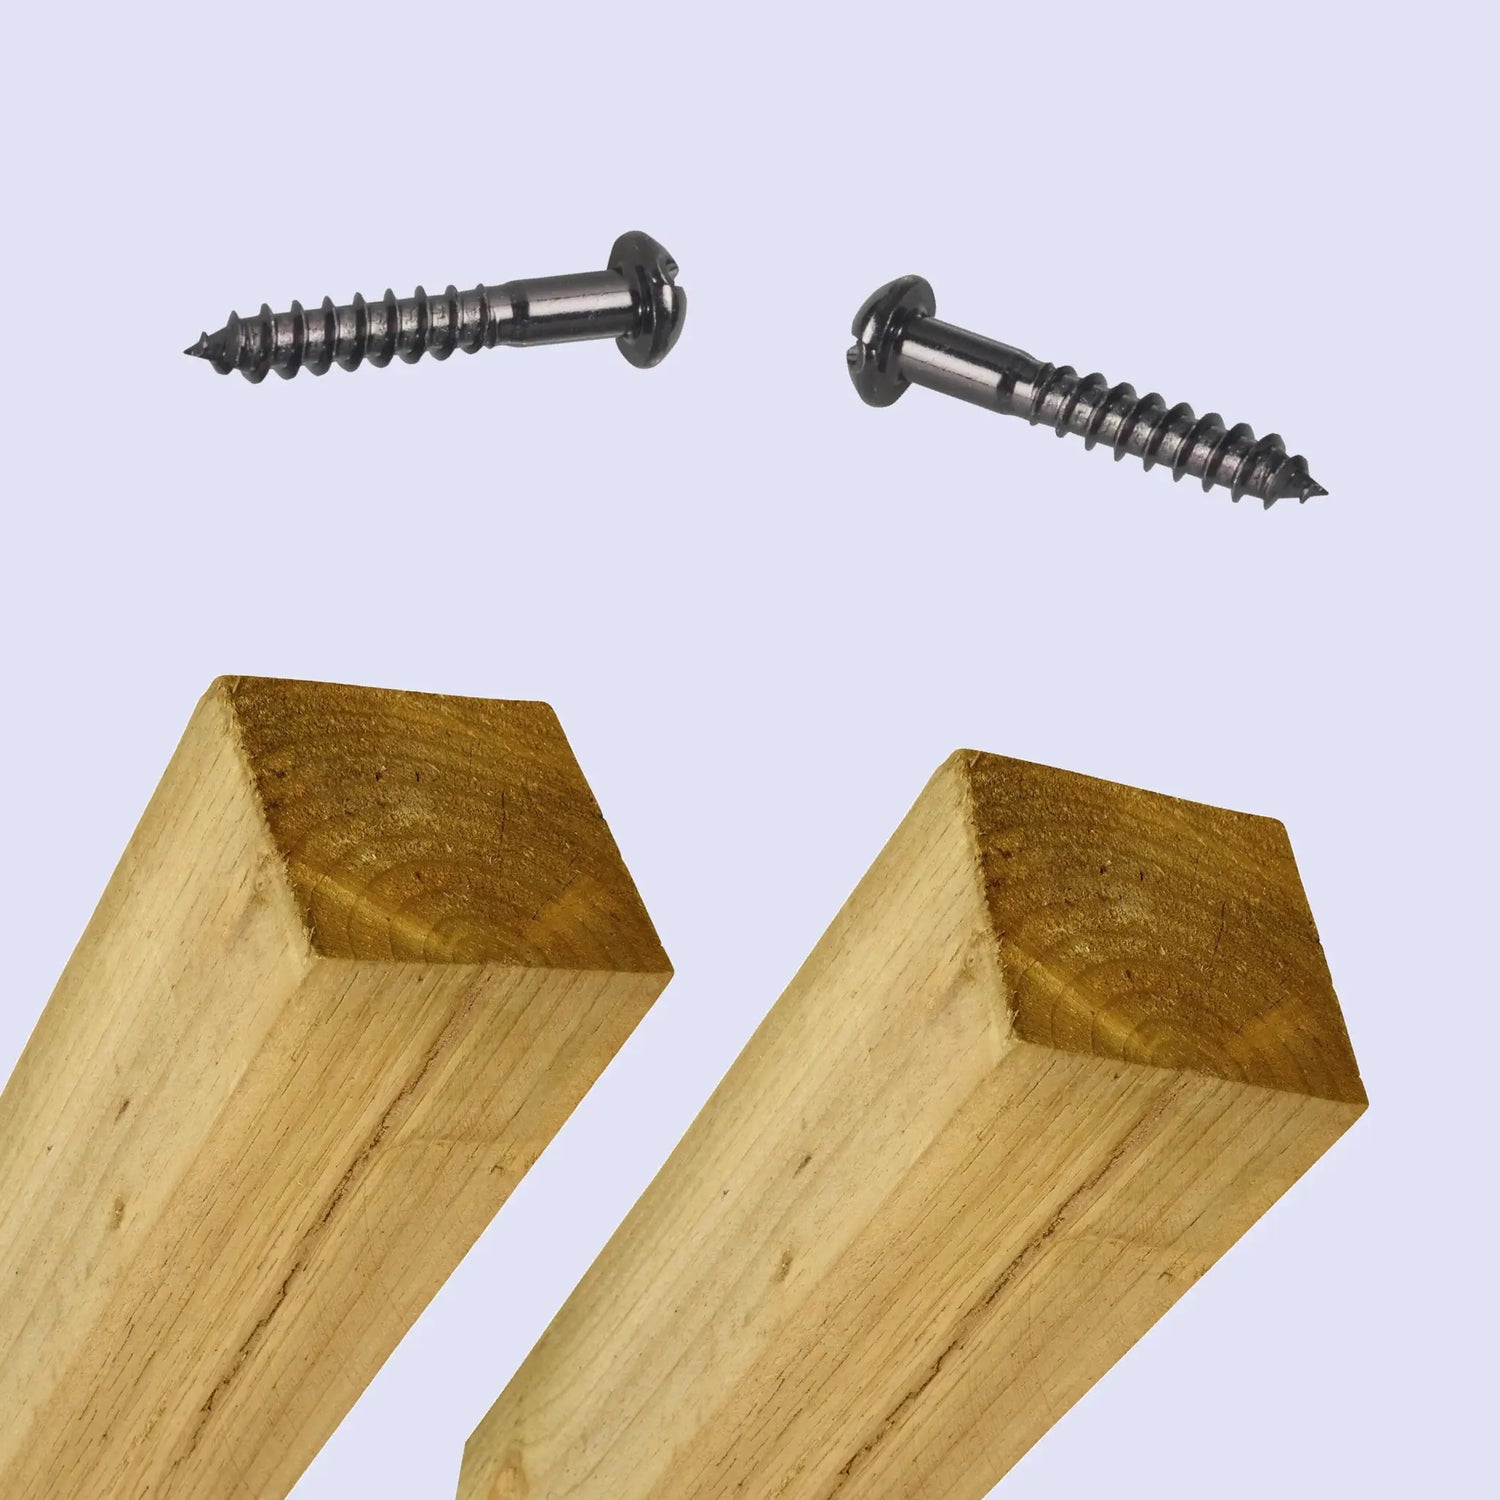 wooden posts and black screws in a grey background